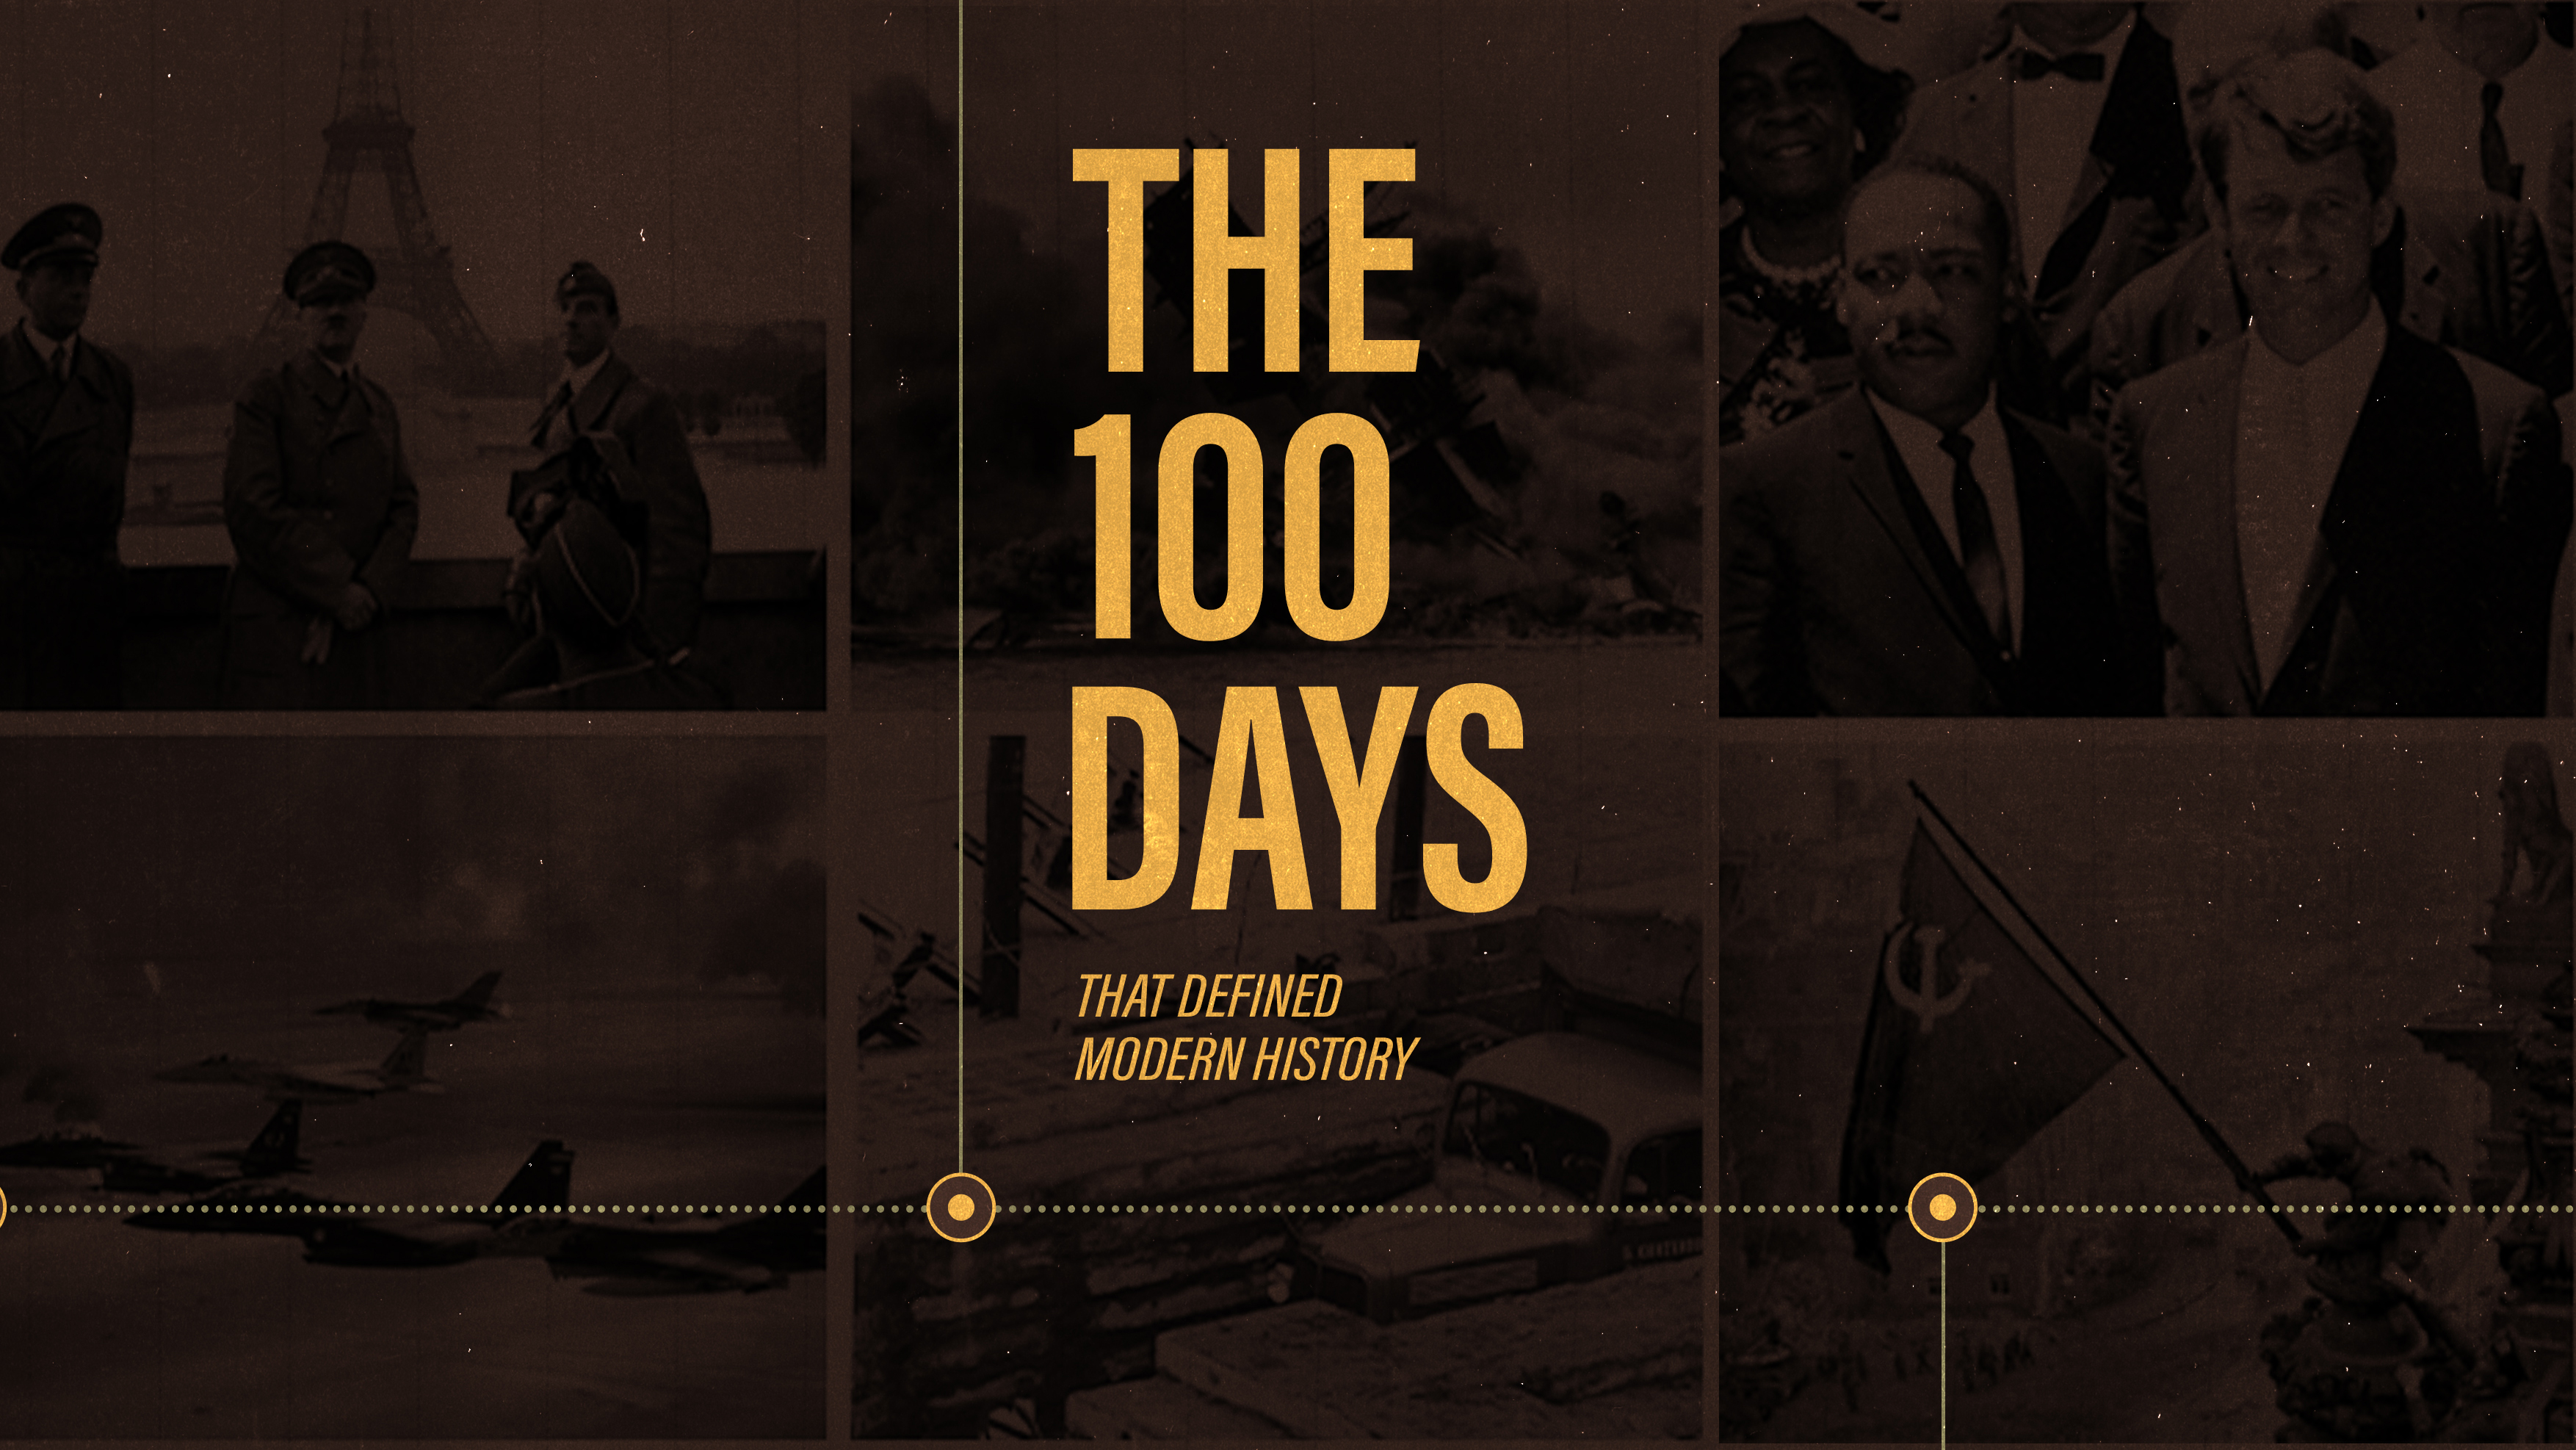 THE 100 DAYS - An electronic press kit, descriptions and more are available under "Additional Assets."